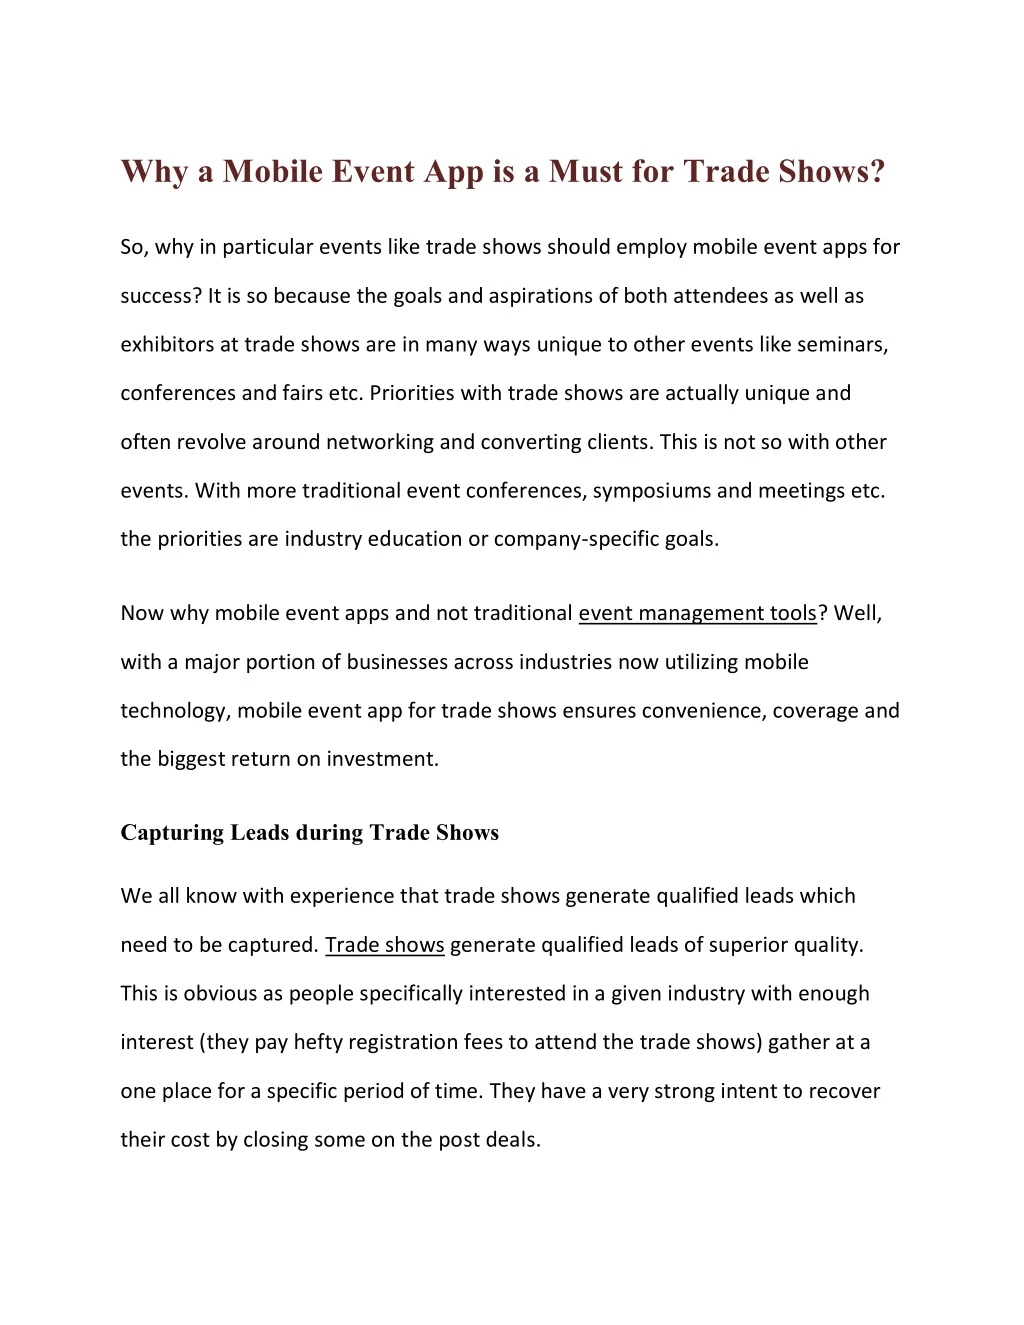 why a mobile event app is a must for trade shows